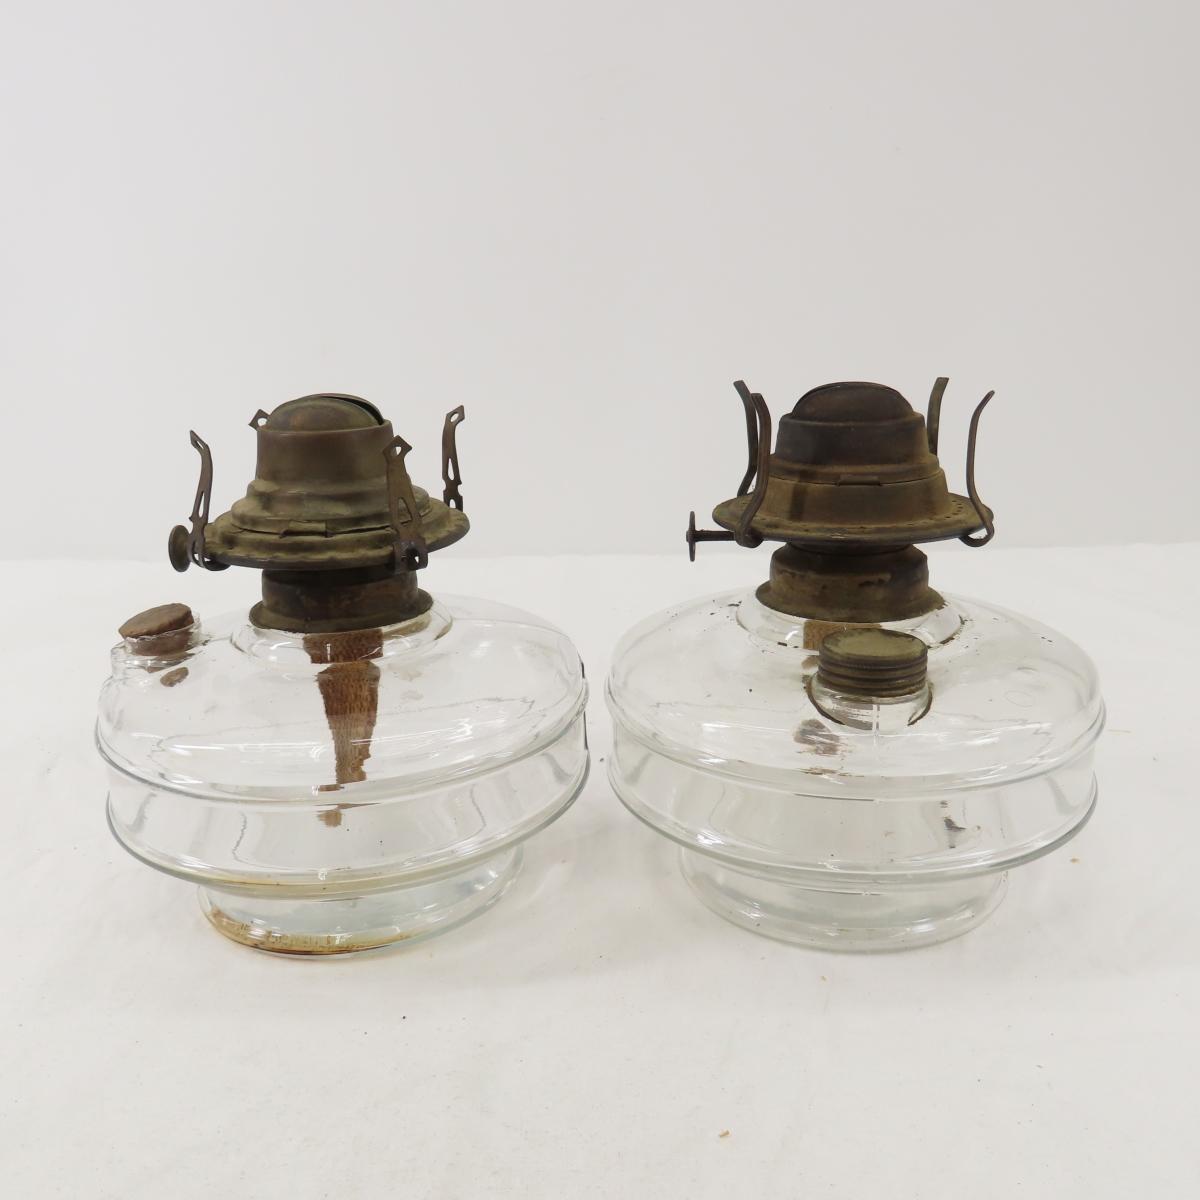 5 Antique Oil Lamps with Shades